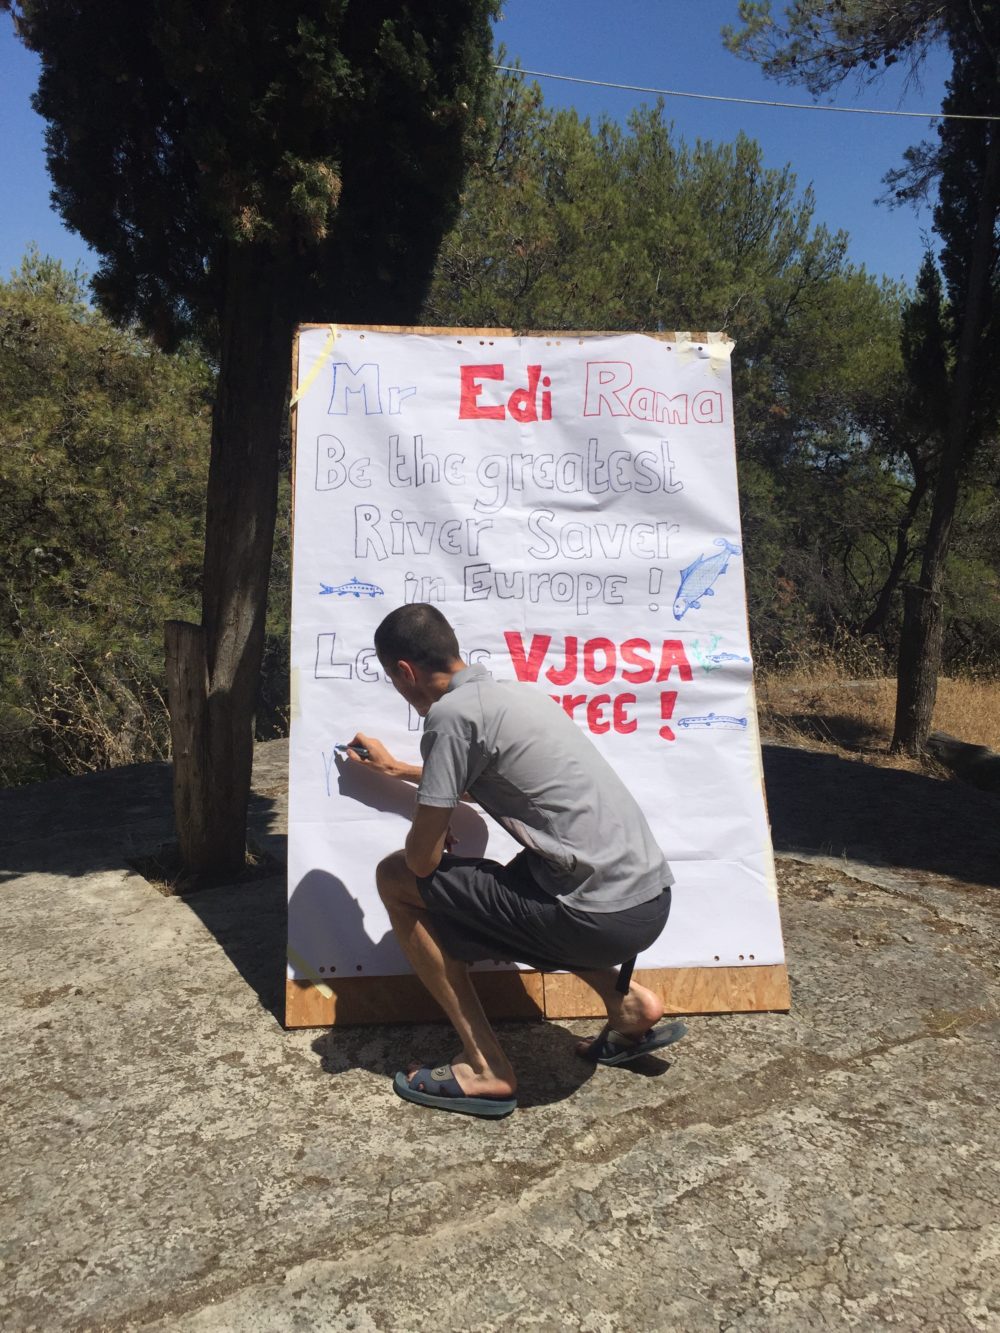 OAA organized a solidarity action in Solta, Croatia to save Vjosa river, where participants  from the Western Balkan region signed a petition for the prime minster of Albania, Edi Rama.